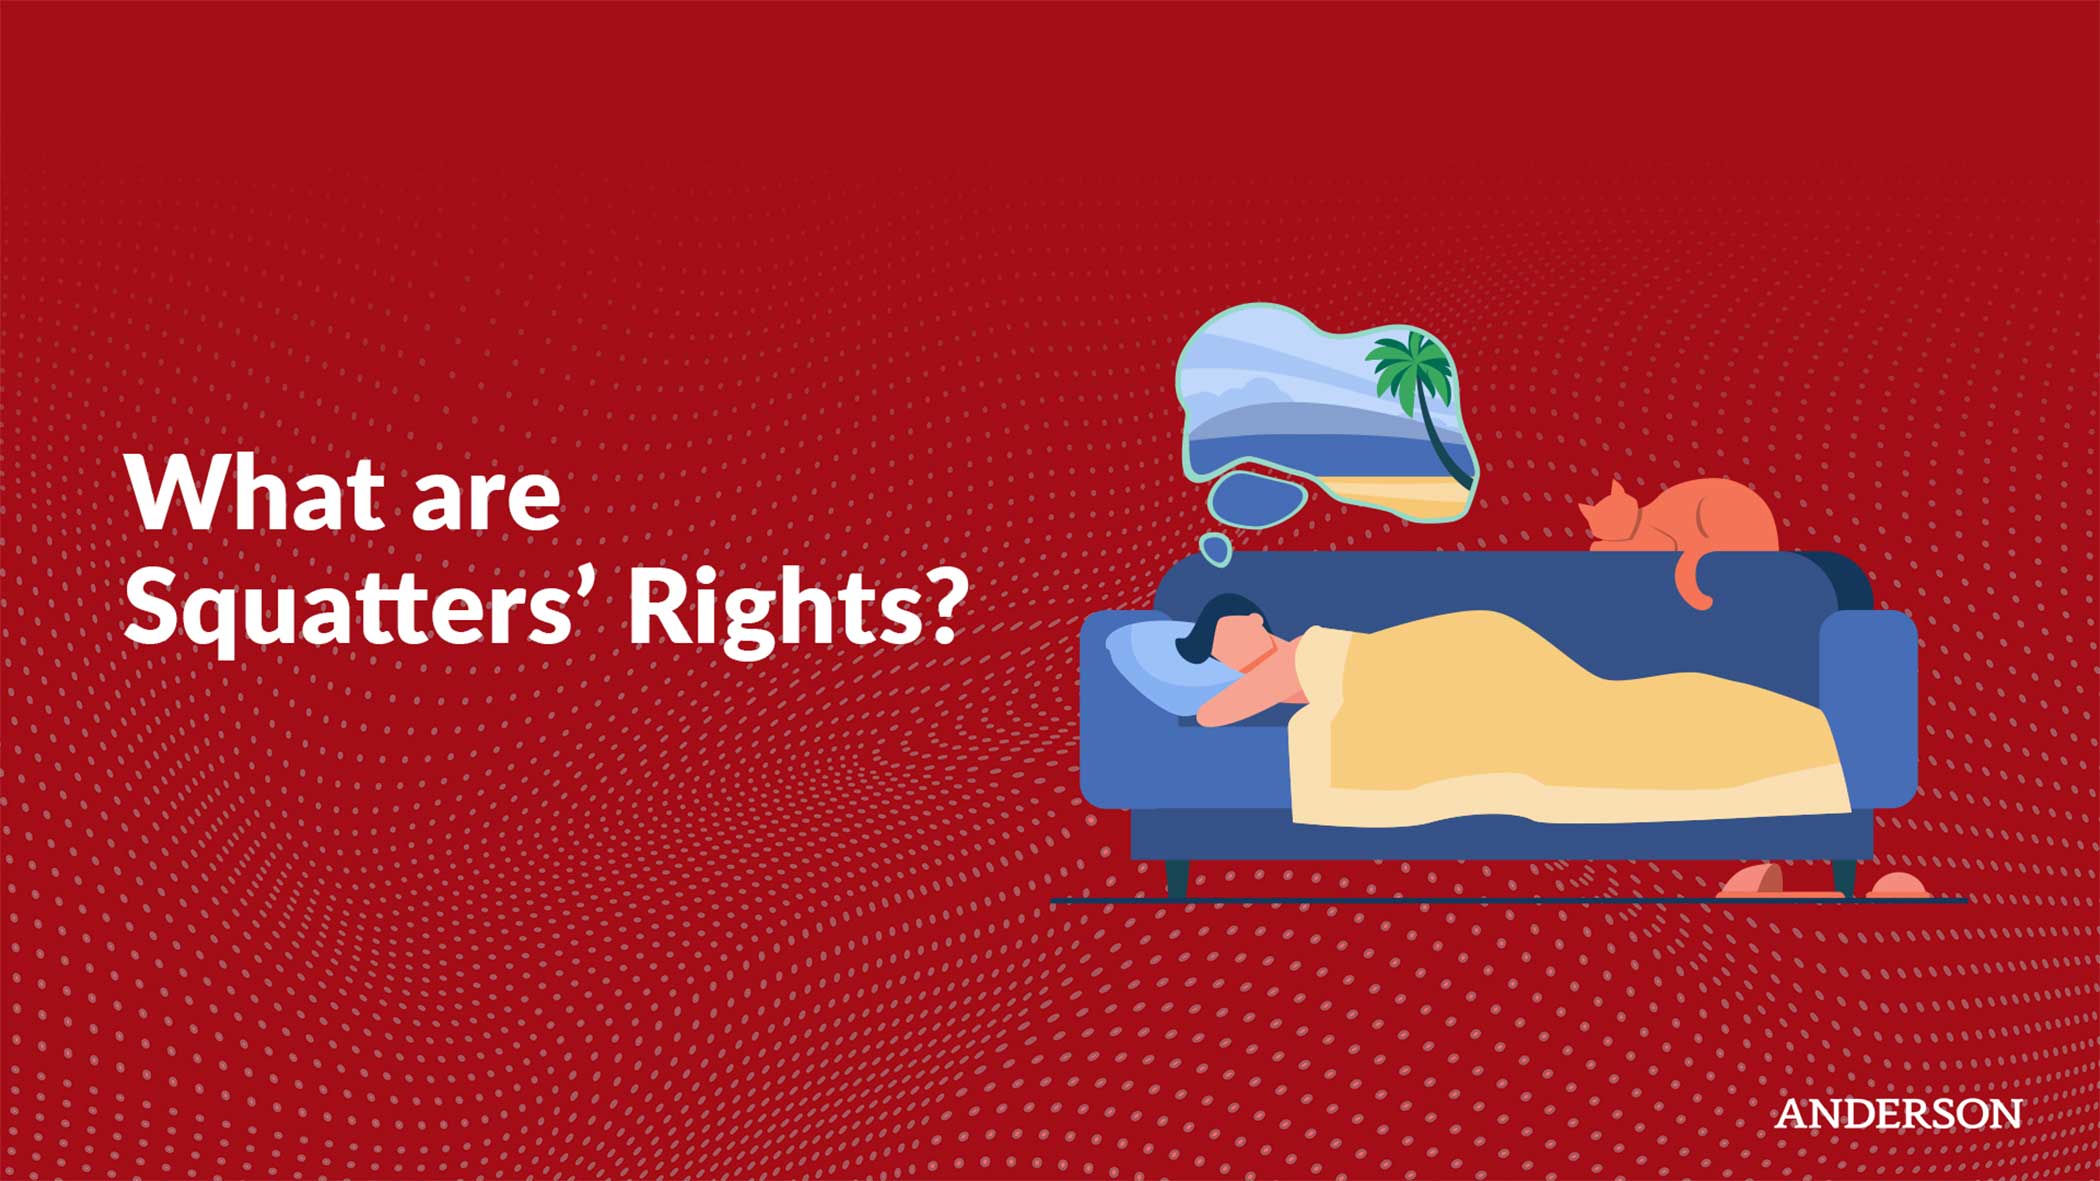 What are Squatters Rights? Why Do Squatters Have Rights?